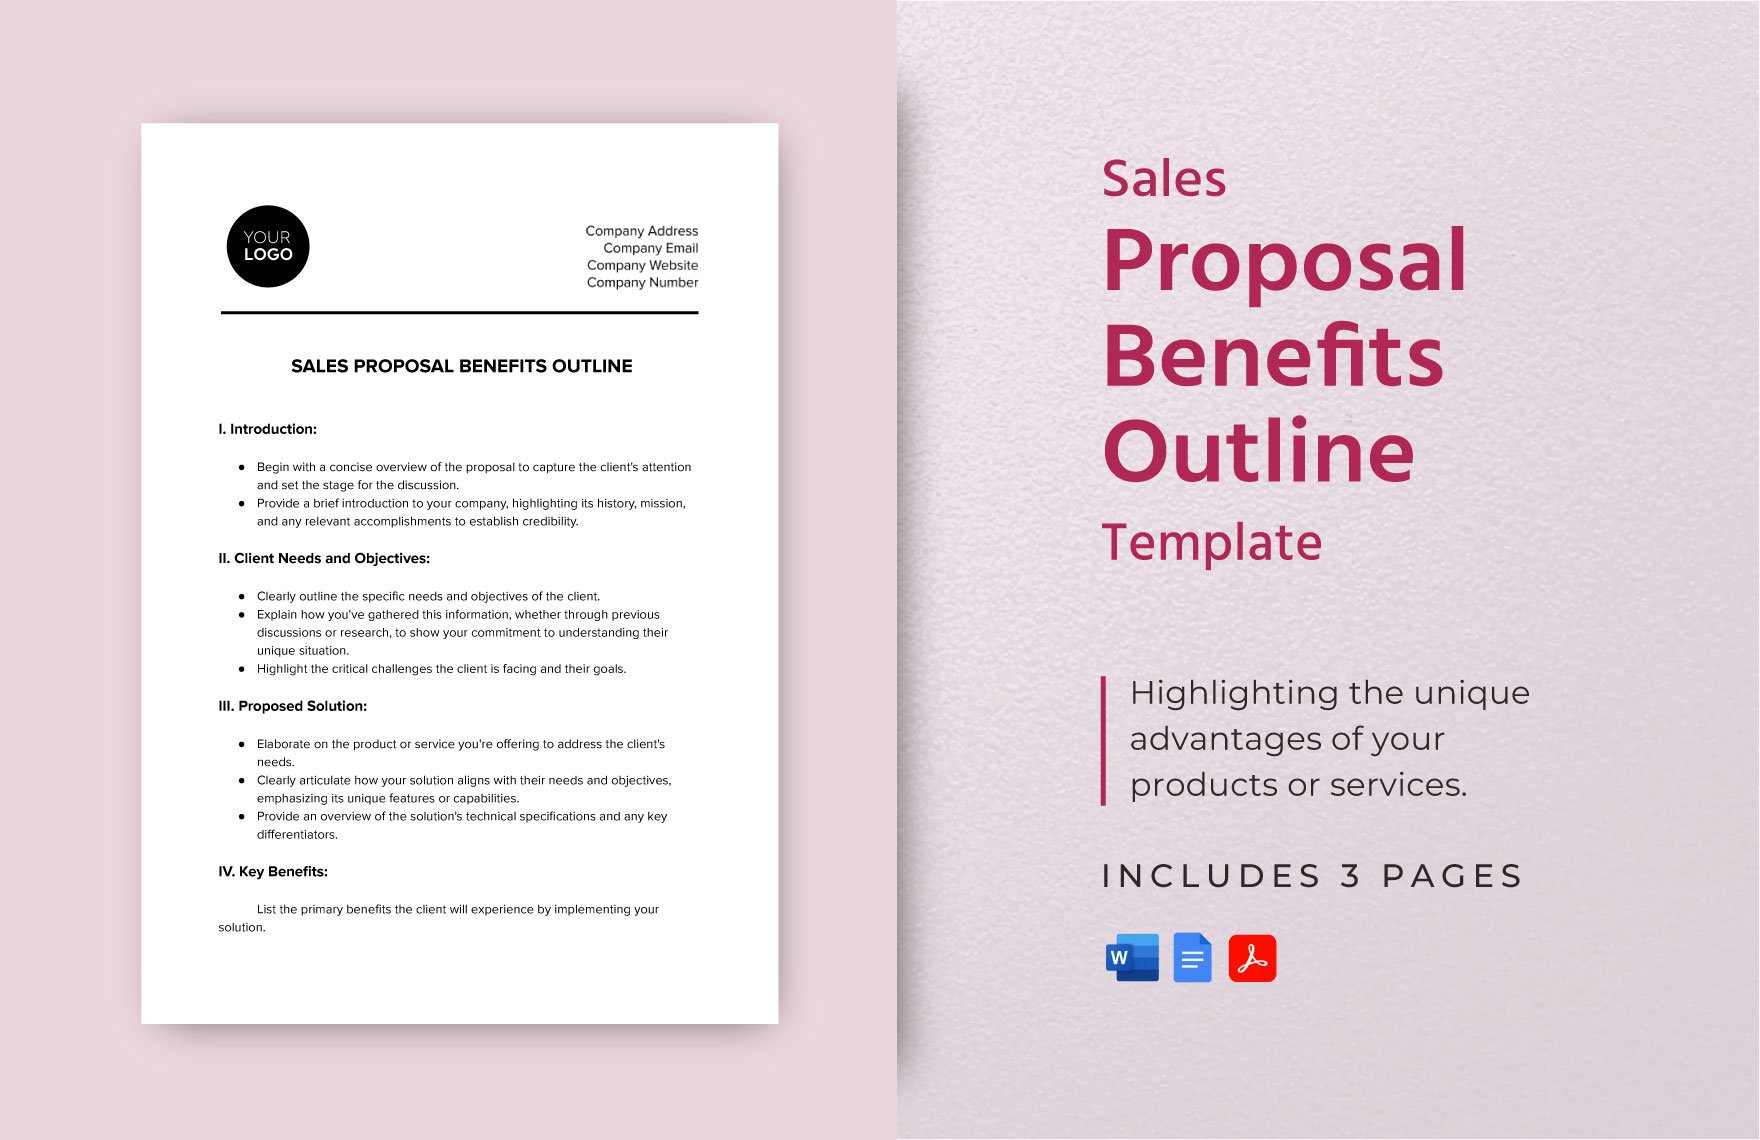 Sales Proposal Benefits Outline Template in Word, Google Docs, PDF